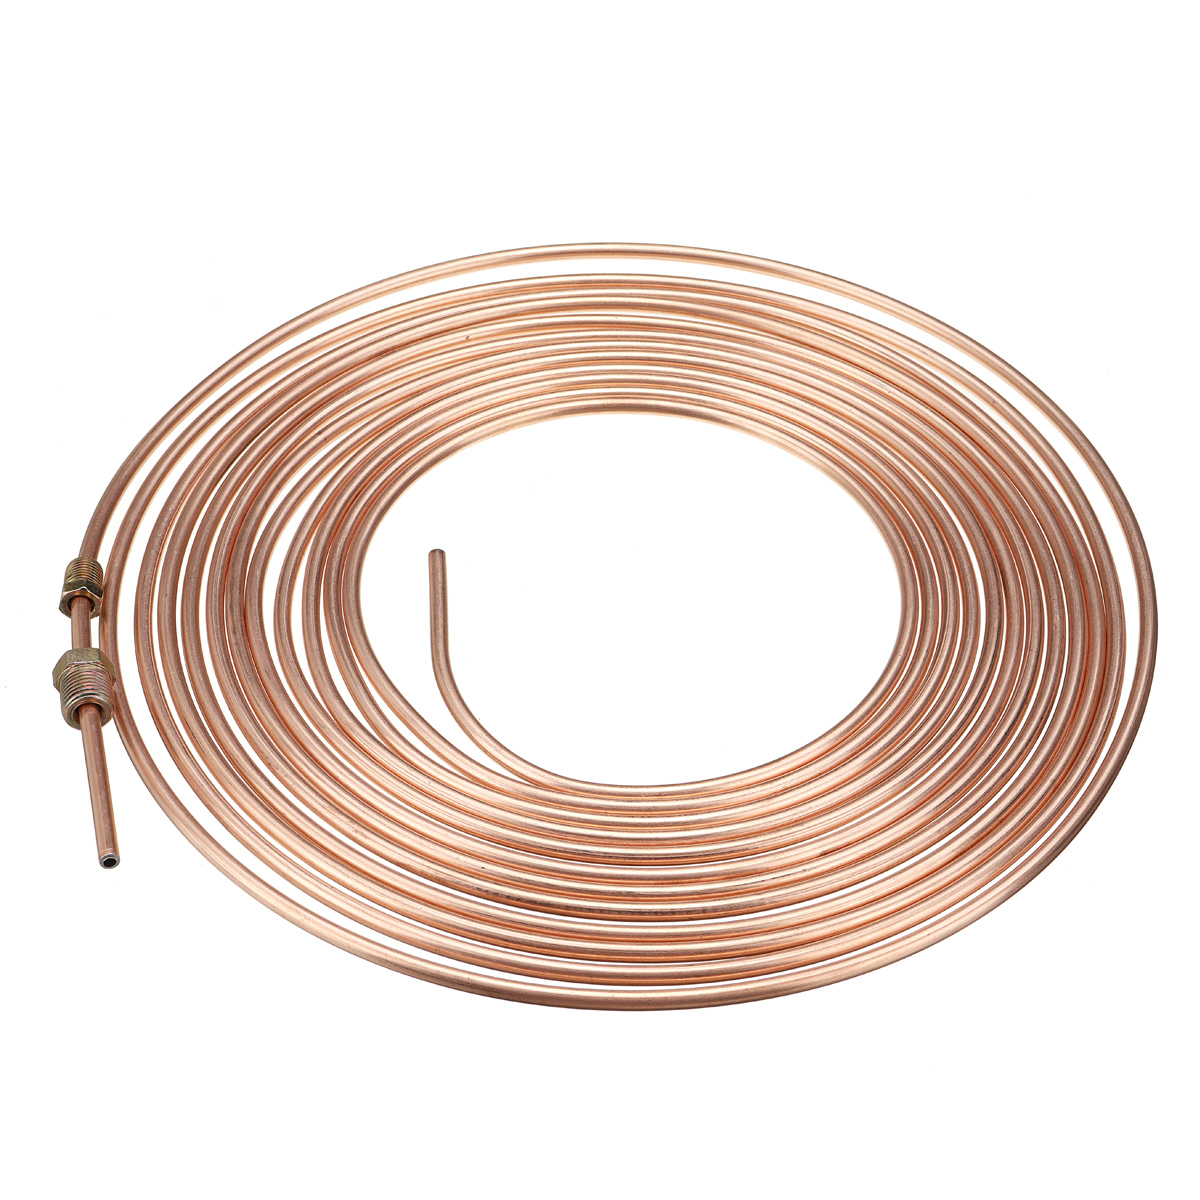 Universal-25Ft-Copper-Nickel-Brake-Line-Tubing-Kit-316quot-OD-with-15Pcs-Nuts-1586631